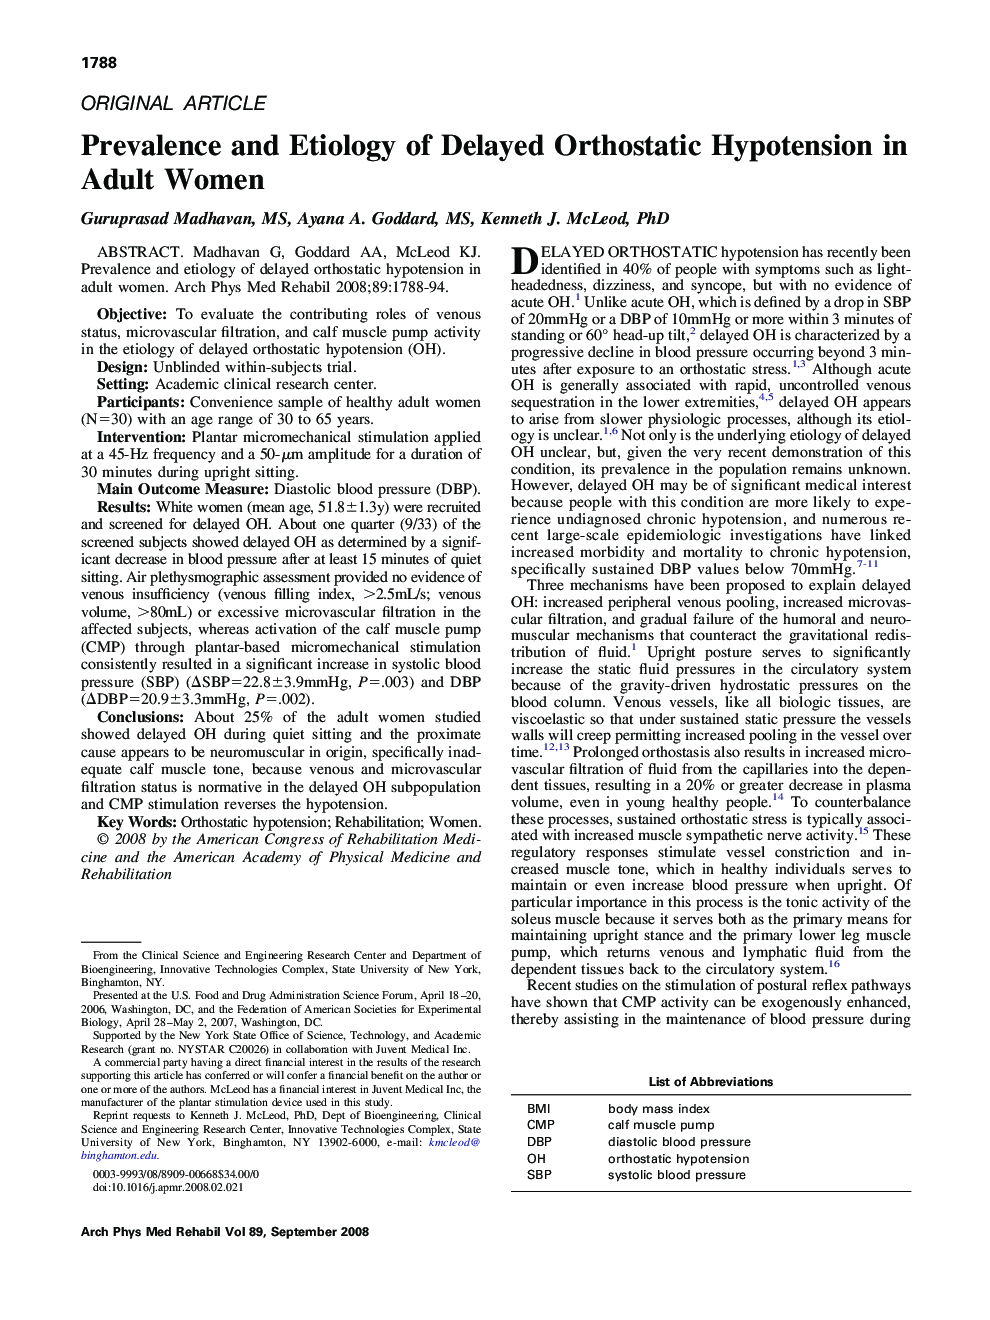 Prevalence and Etiology of Delayed Orthostatic Hypotension in Adult Women 